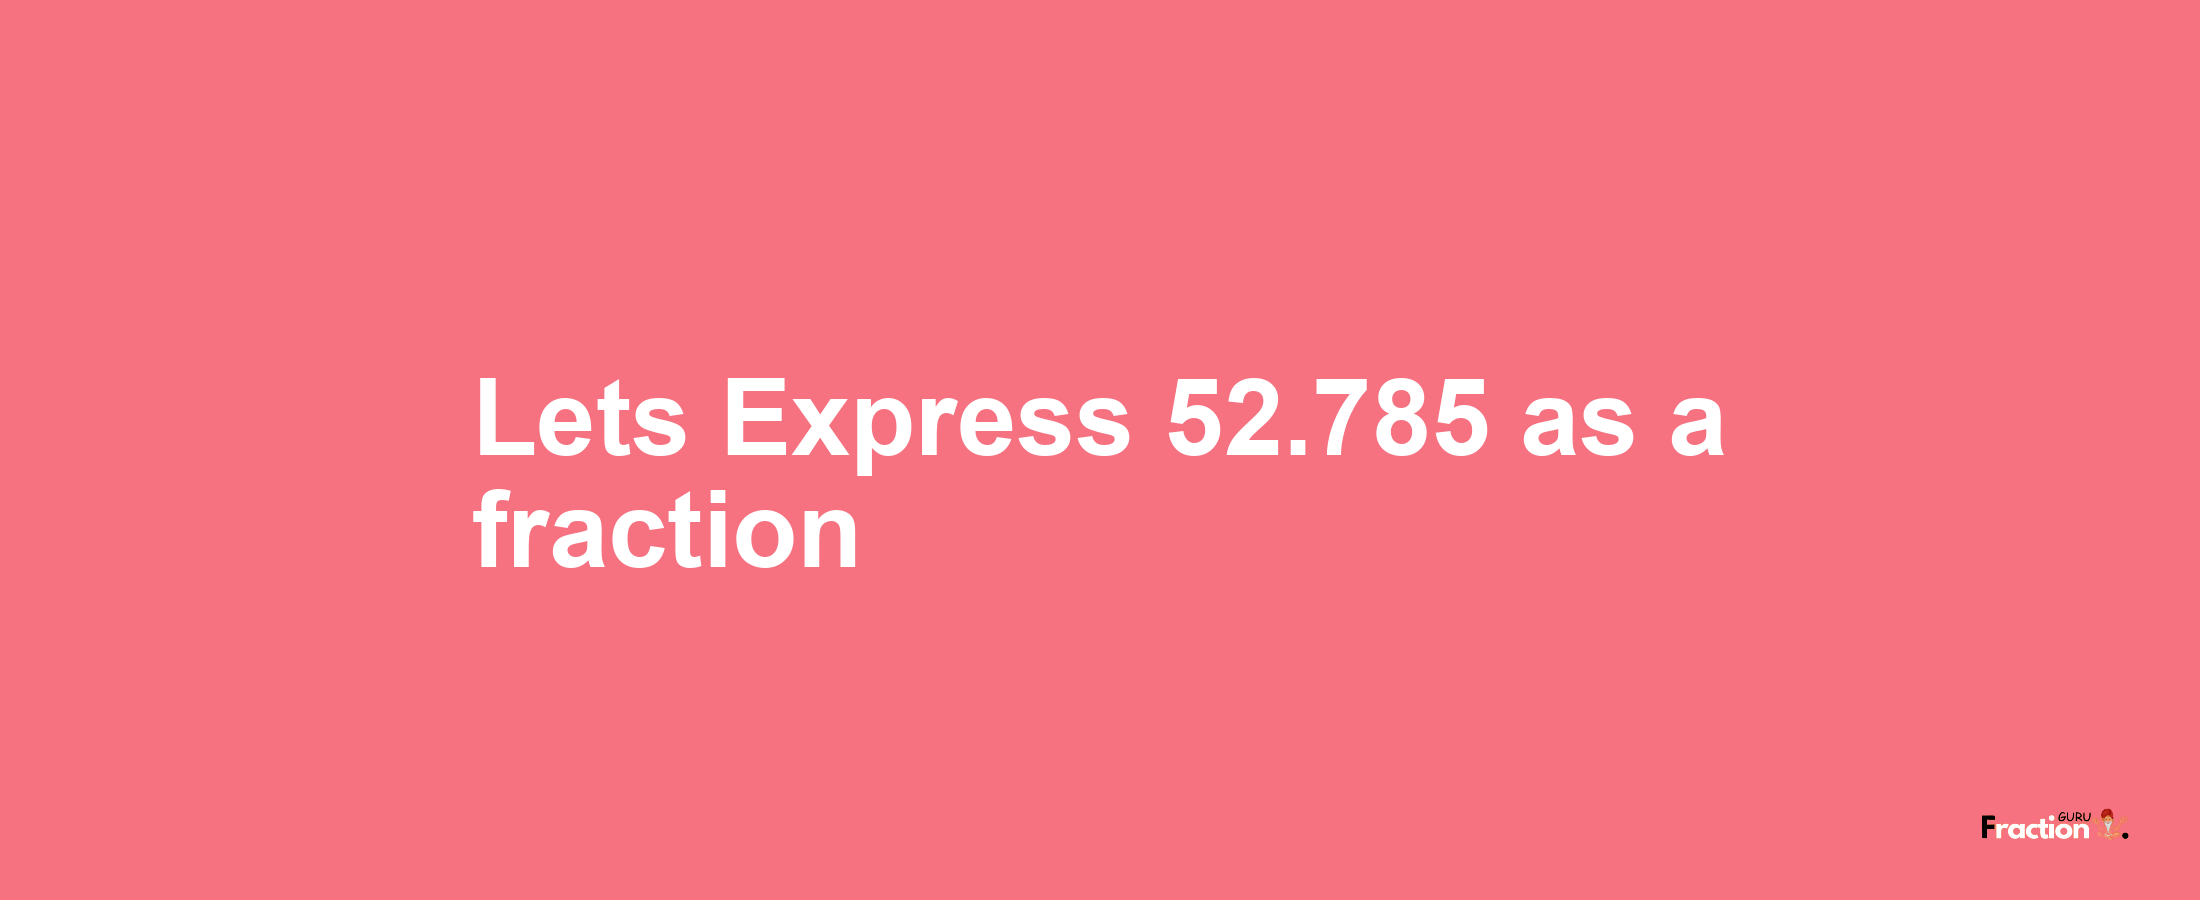 Lets Express 52.785 as afraction